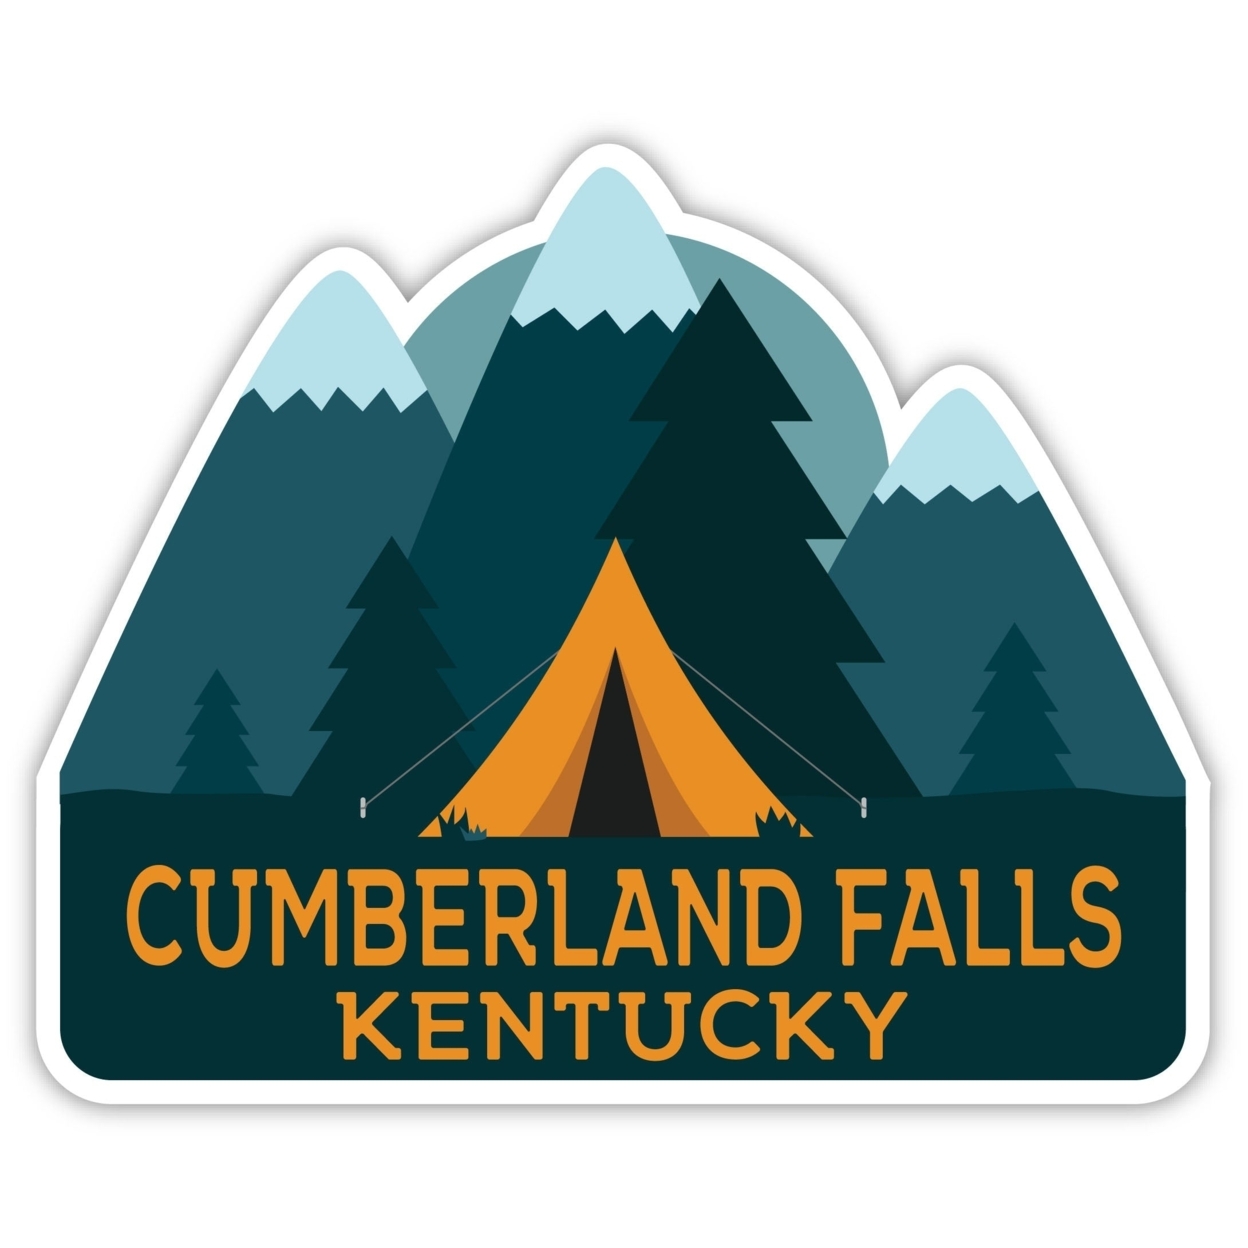 Cumberland Falls Kentucky Souvenir Decorative Stickers (Choose Theme And Size) - 4-Pack, 10-Inch, Tent